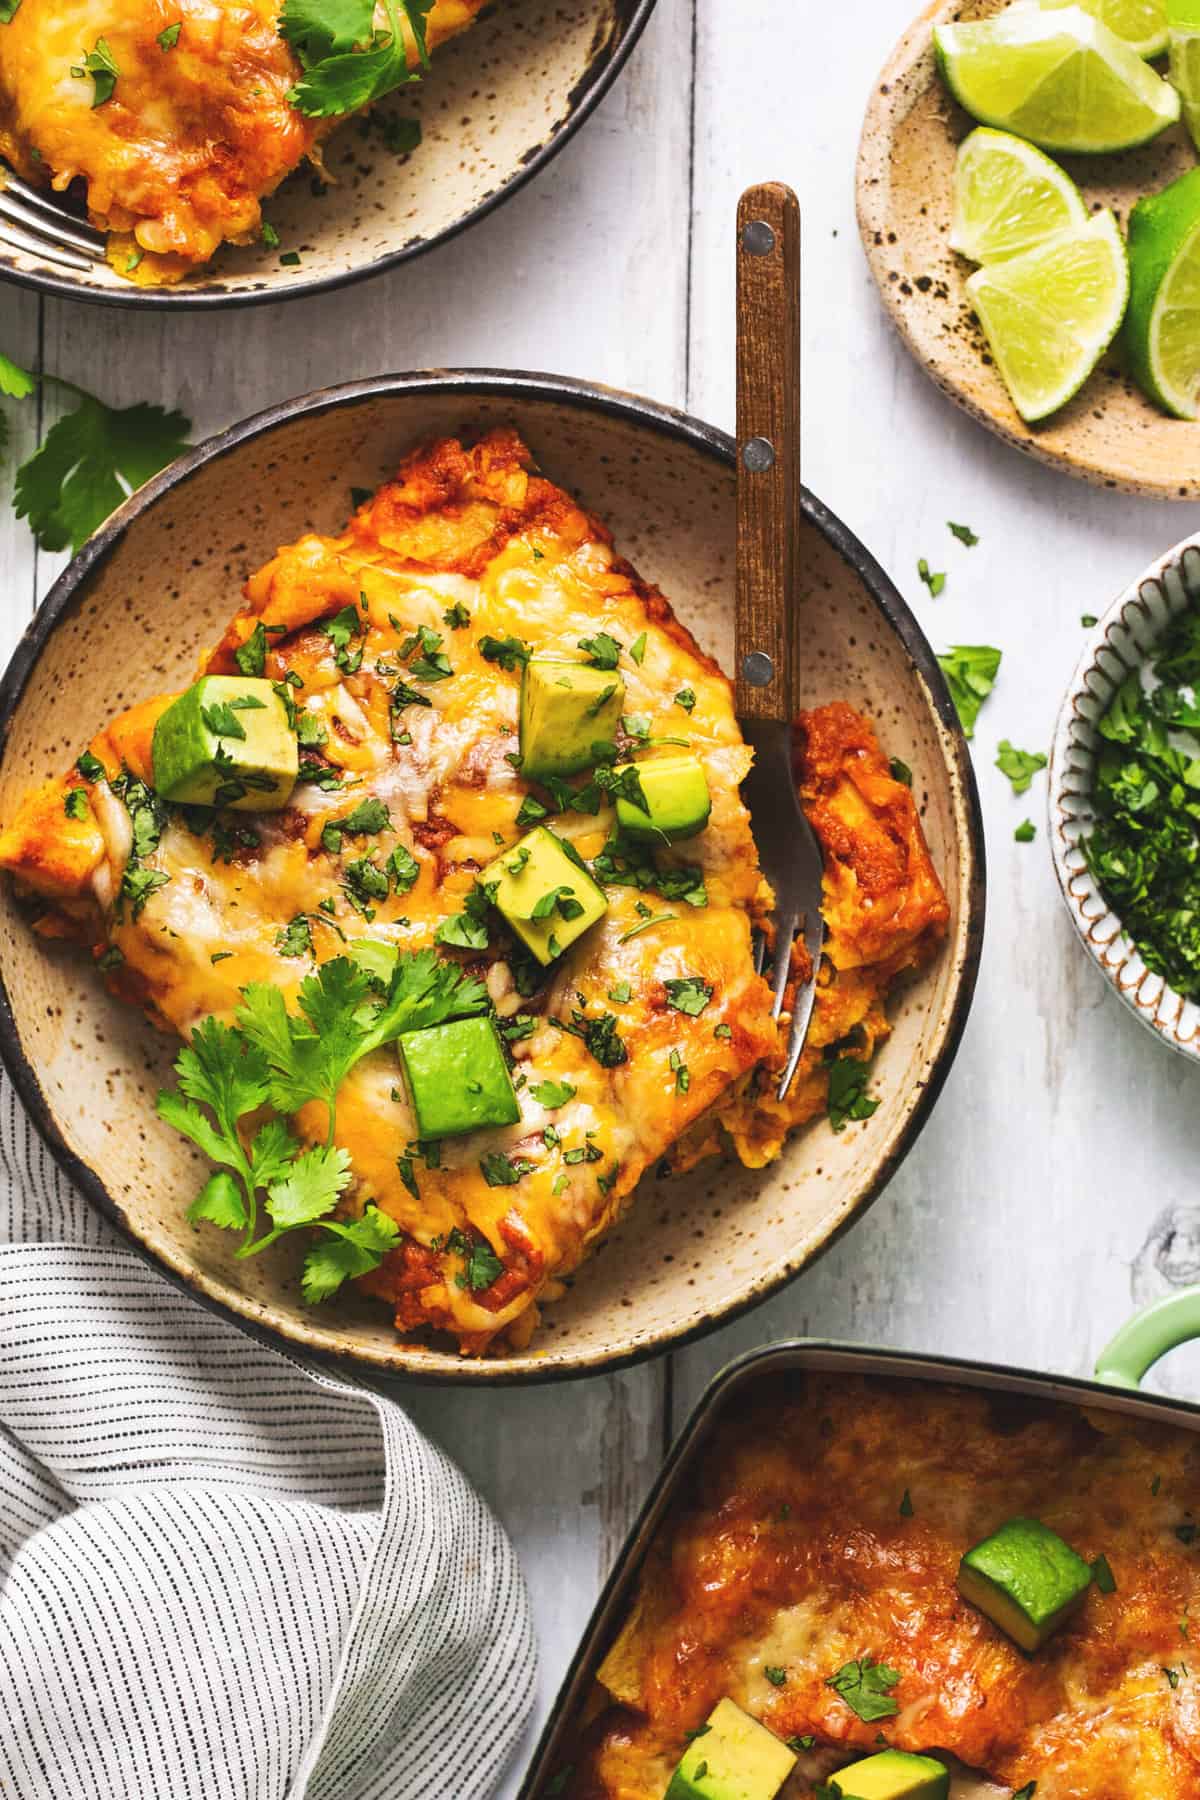 A freshly baked enchilada dish garnished with avocado, cilantro, and a lime wedge is displayed.